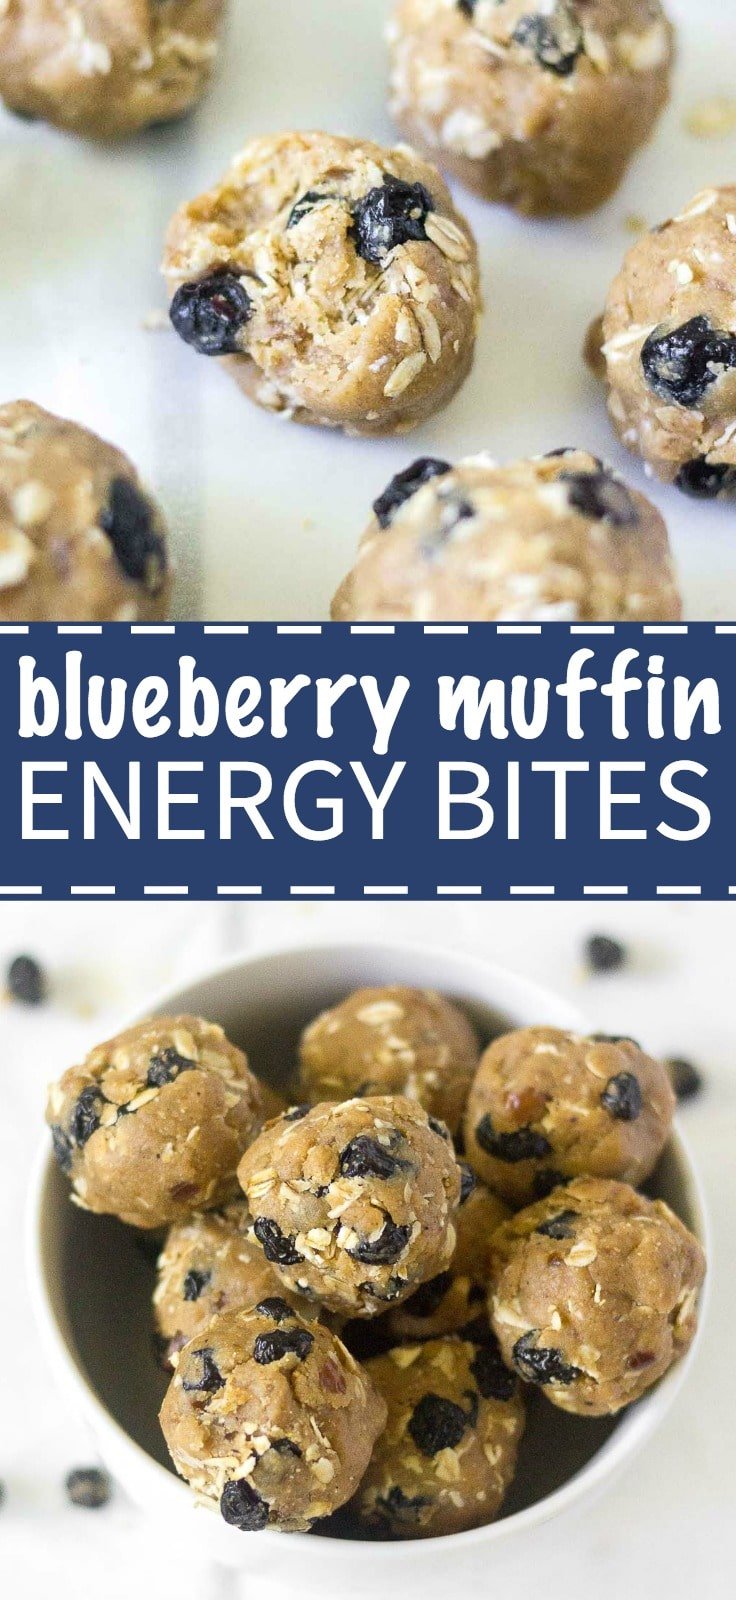 These blueberry muffin energy bites are a delicious and healthy bite-sized snack! Made with oats, cinnamon and almond butter, these snack bites are healthy and give you all the energy you need.